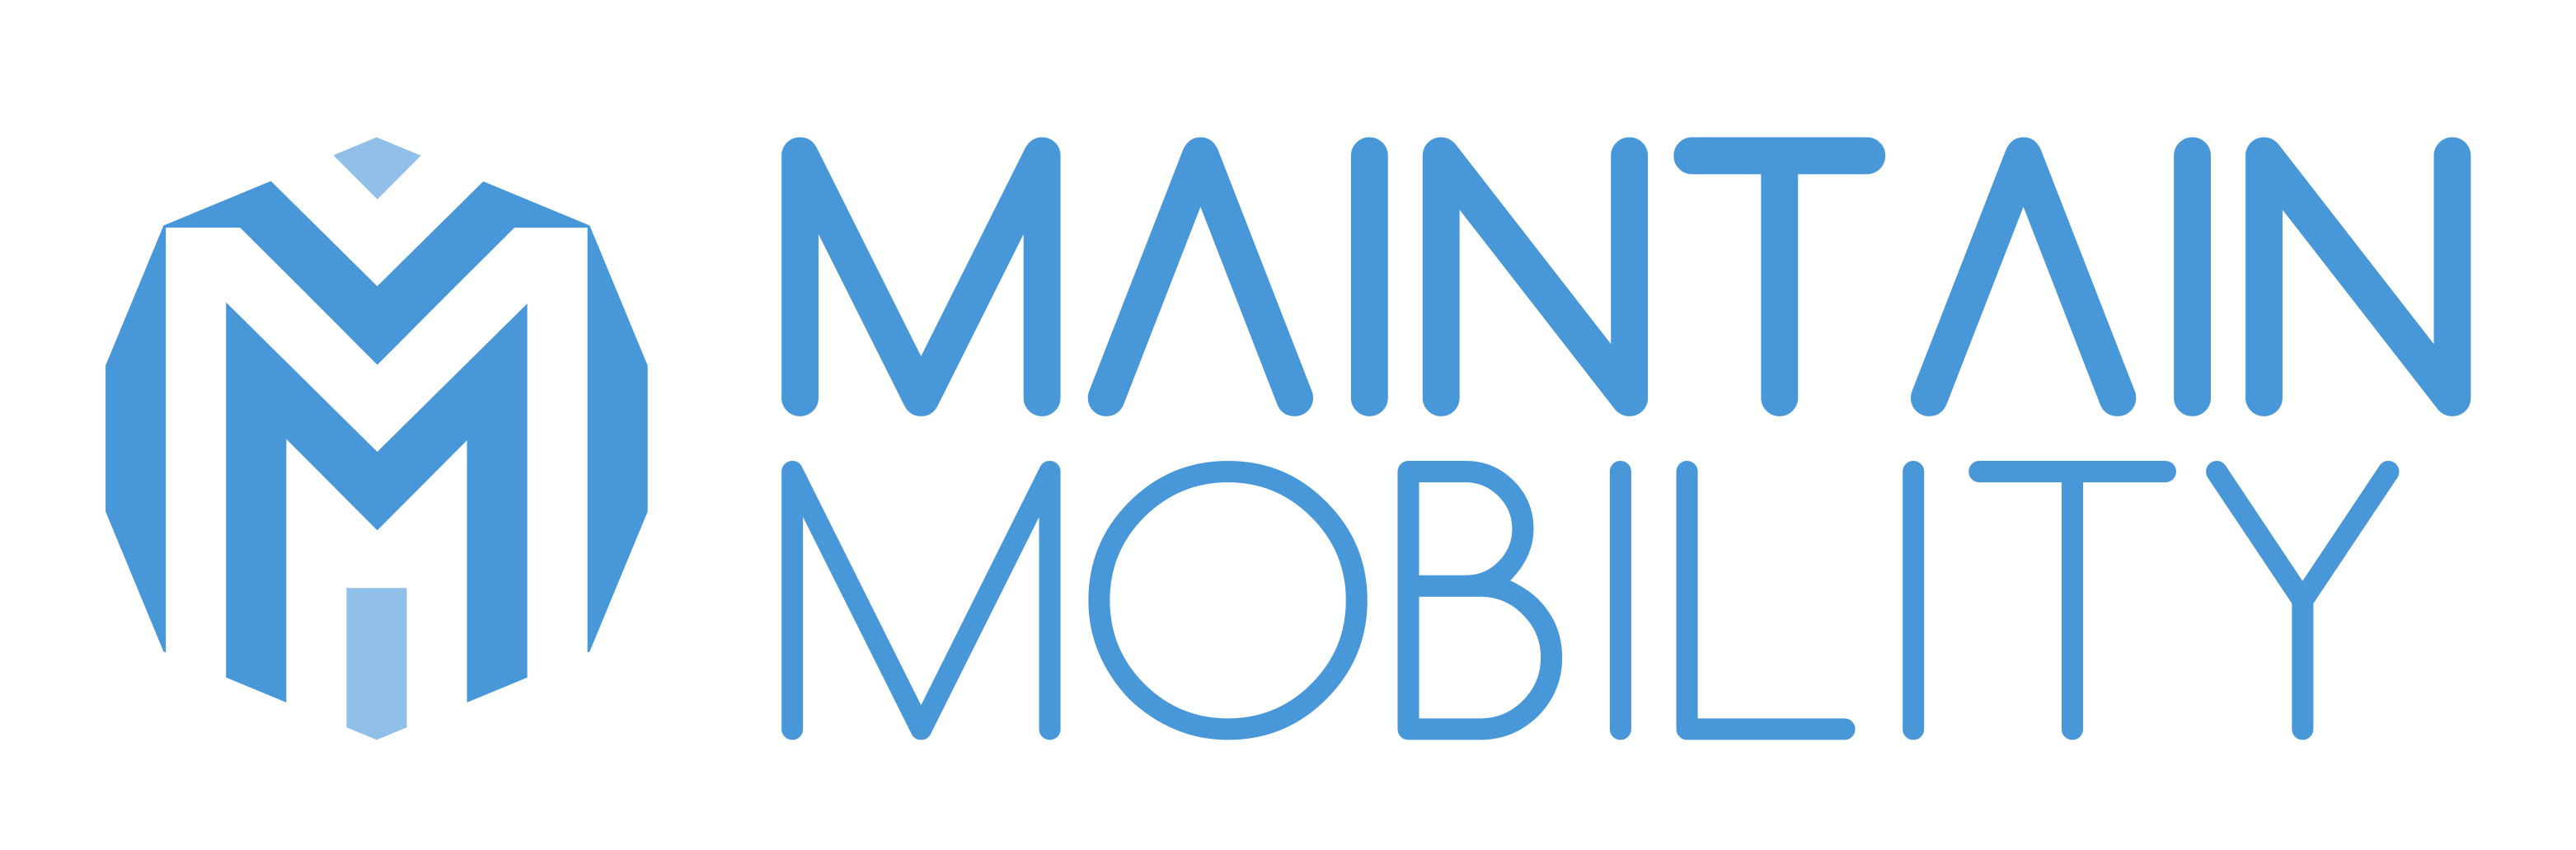 Maintain Mobility - Assistive Technology Servicing